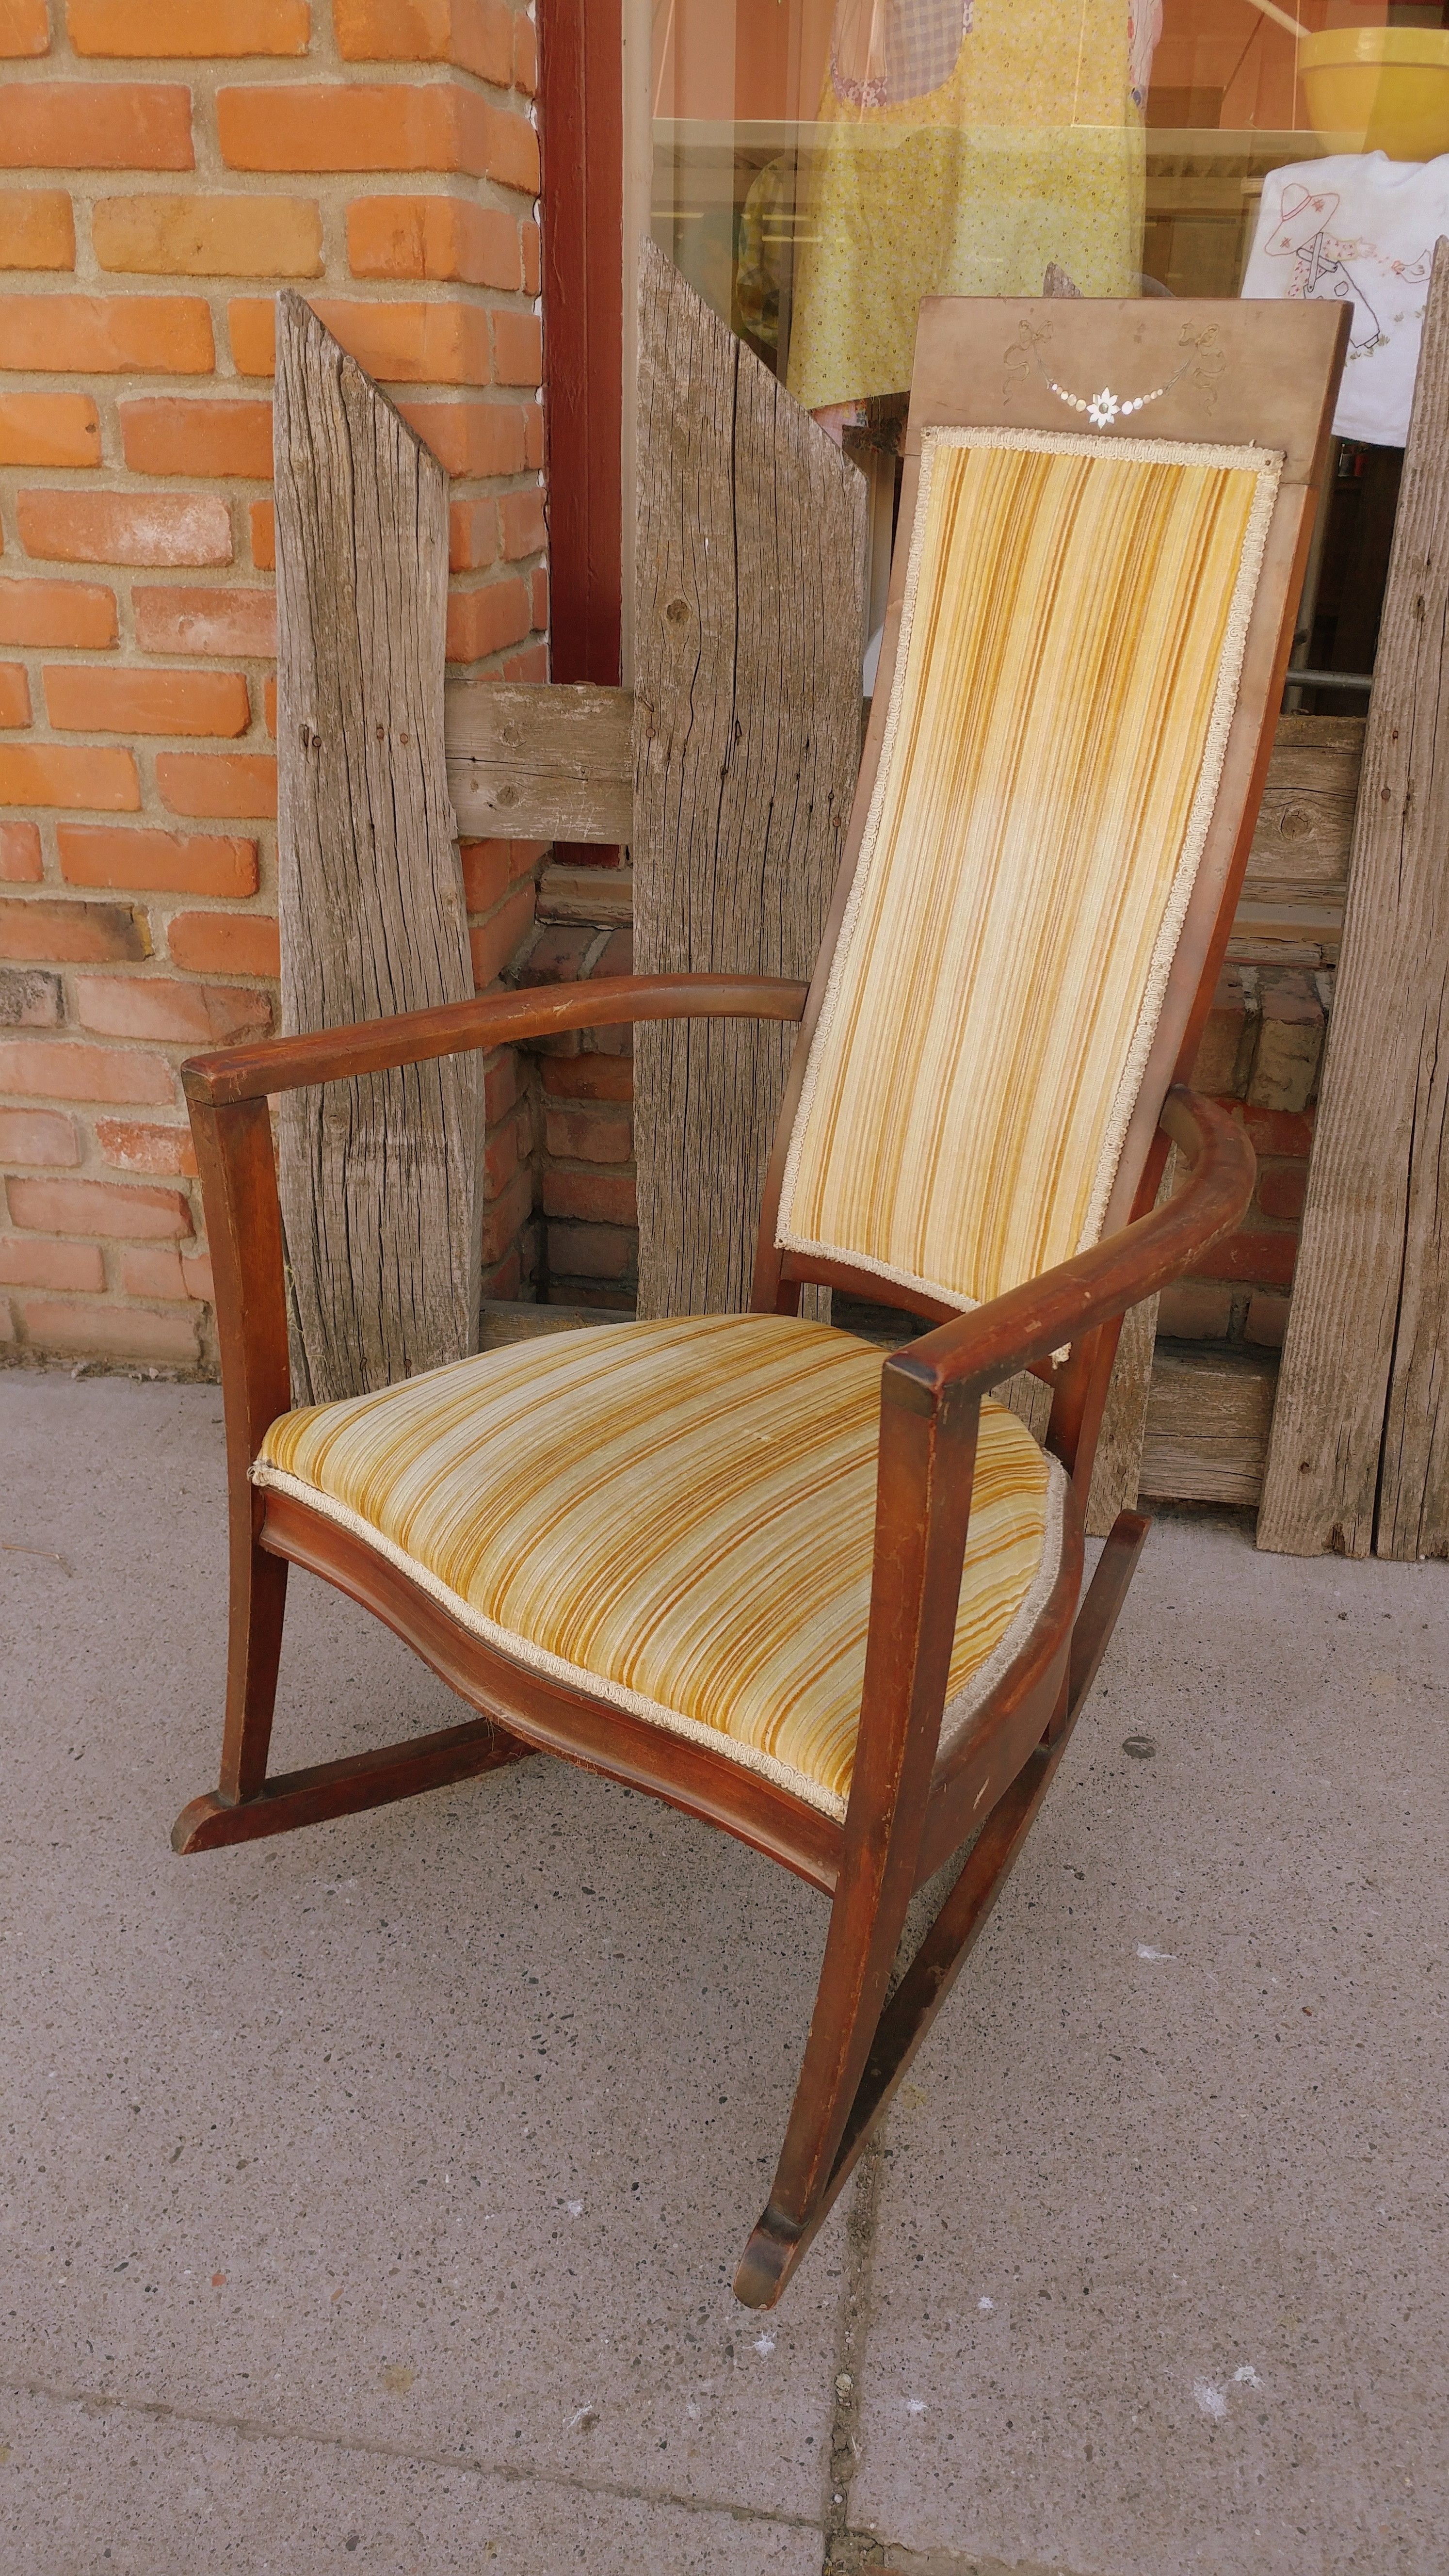 Antique Rocking Chair | Casey Girl Designs With Regard To Antique Rocking Chairs (View 15 of 15)